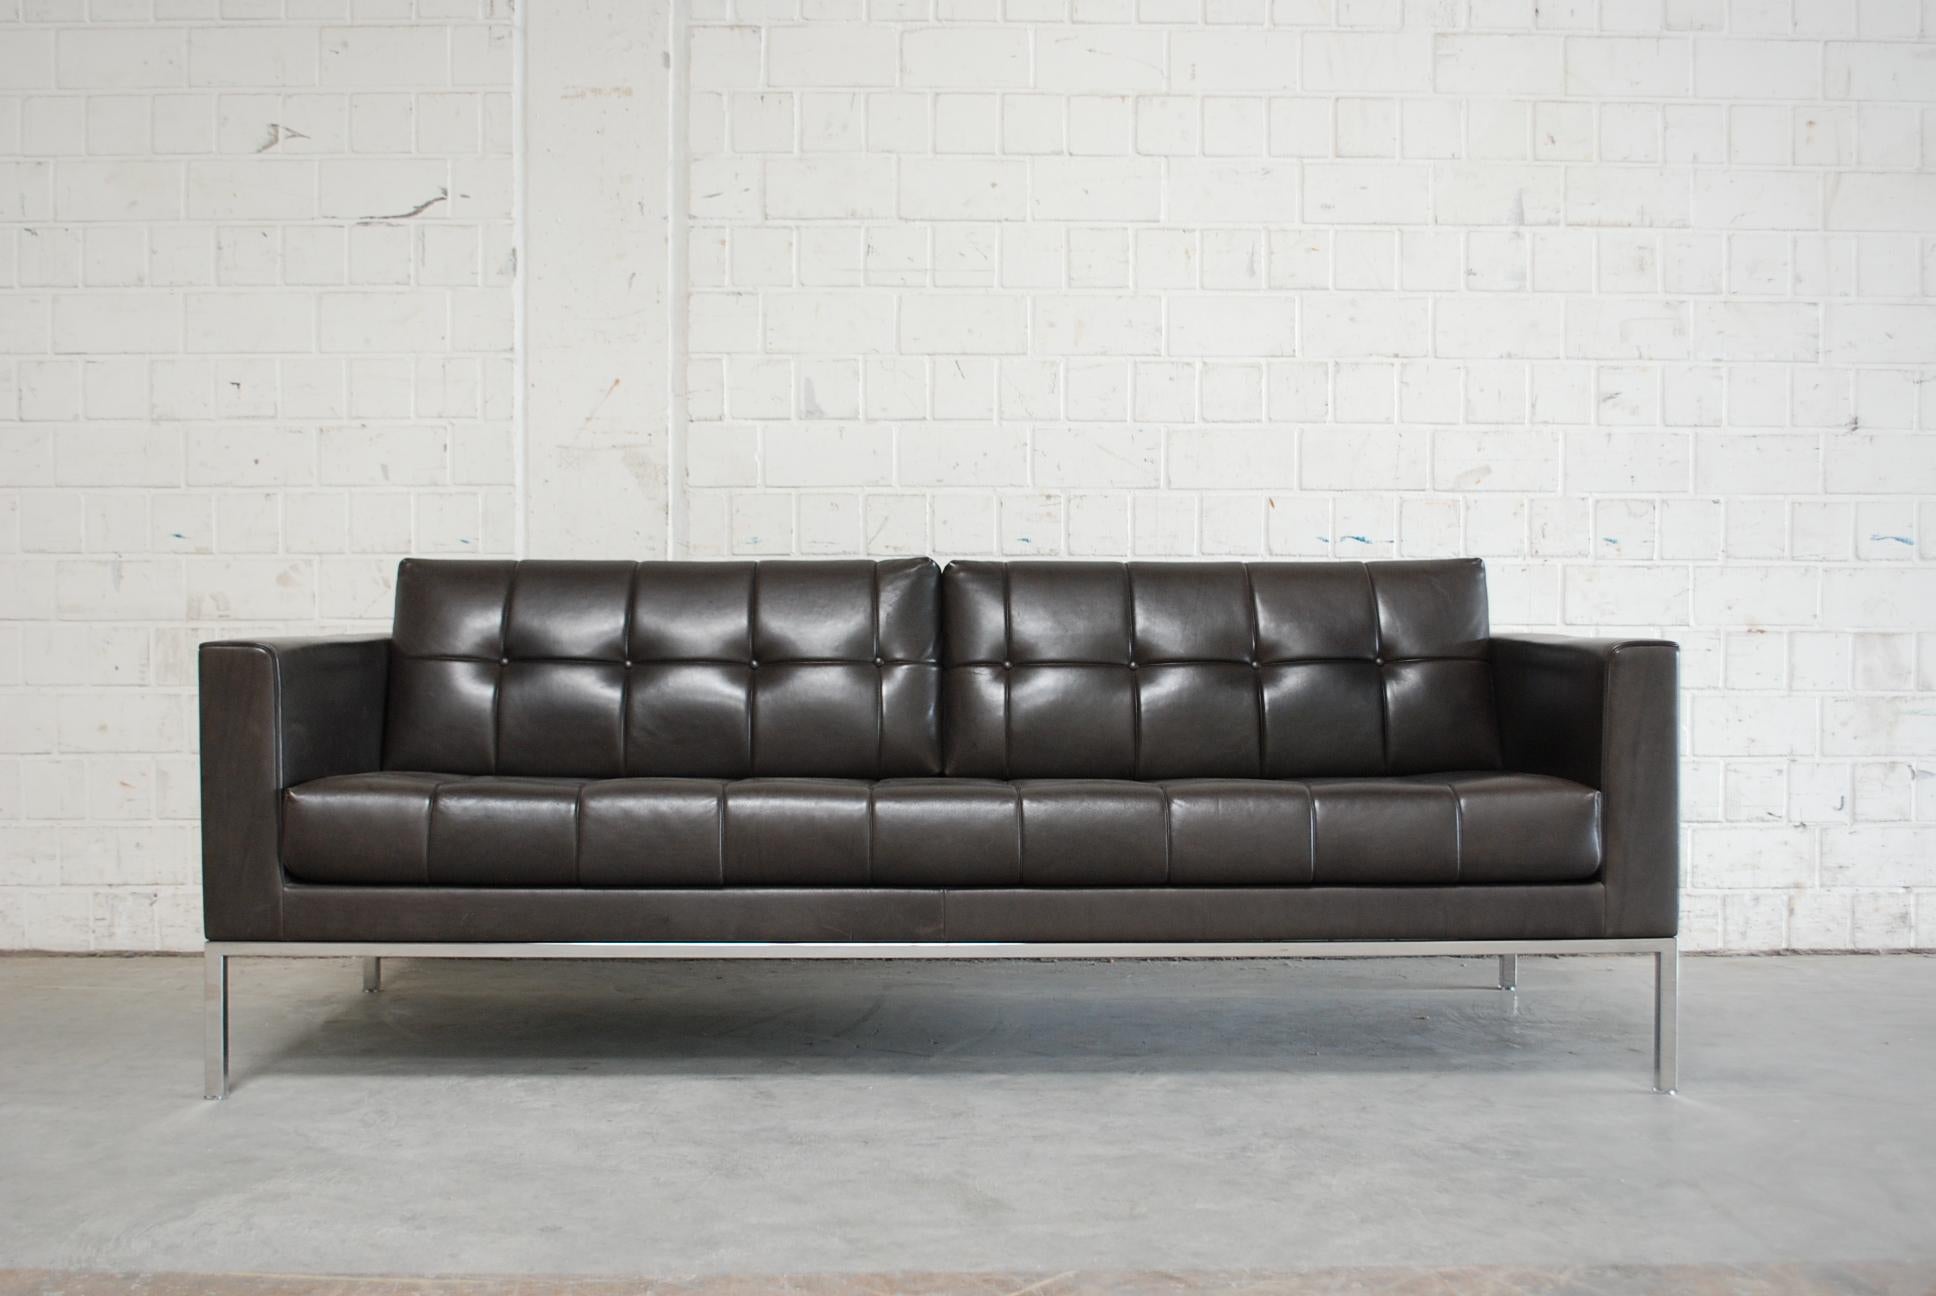 De Sede leather sofa model DS 159. Produced at the year 2010.
The leather is the highest De Sede leather quality DS Naturale leather Fb 55 espresso.
A fine soft premium leather in brown color.
Great comfort and a classic timeless design.
A